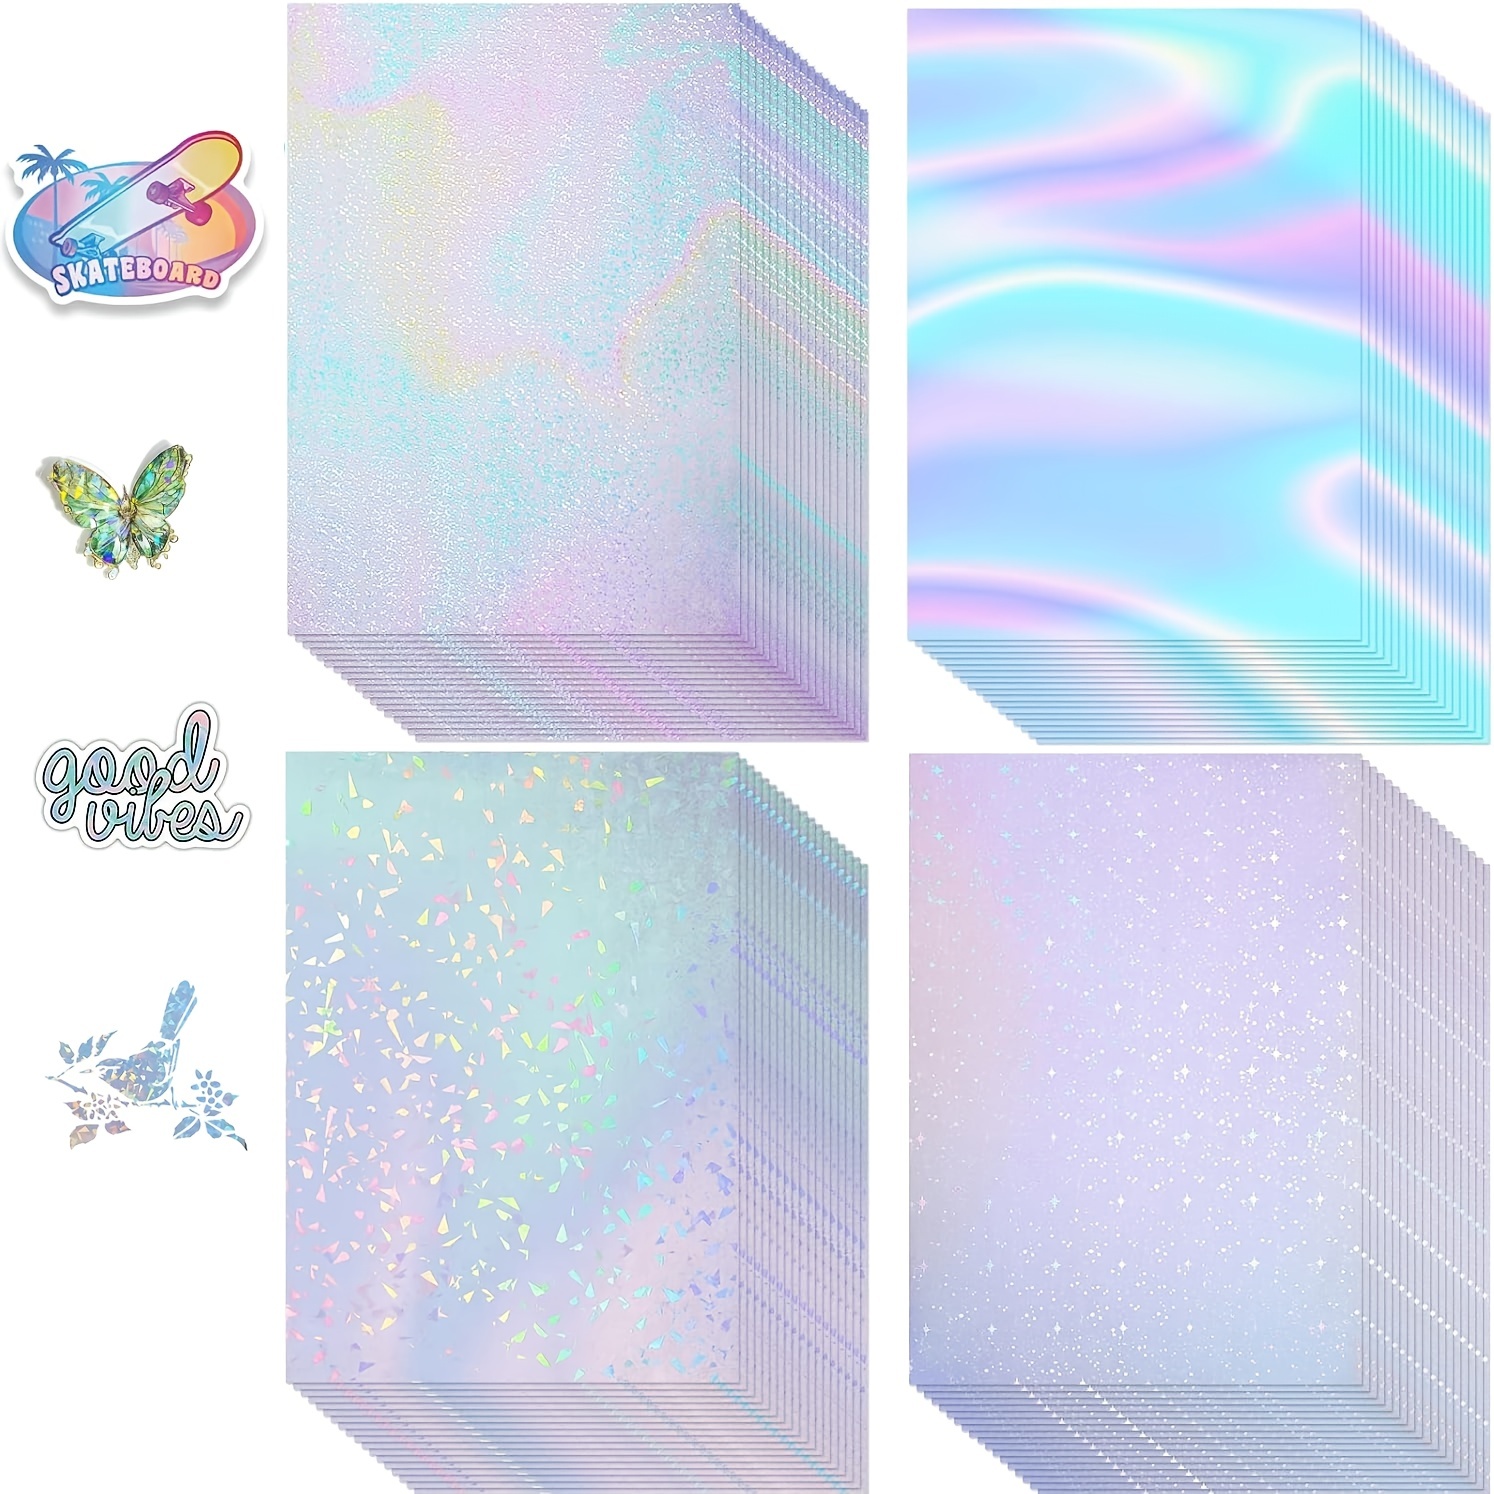 10 Sheets 10 Style A4 Transparent Holographic Overlay Lamination Film A4  Self-Adhesive Laminate Waterproof Vinyl Sticker Paper